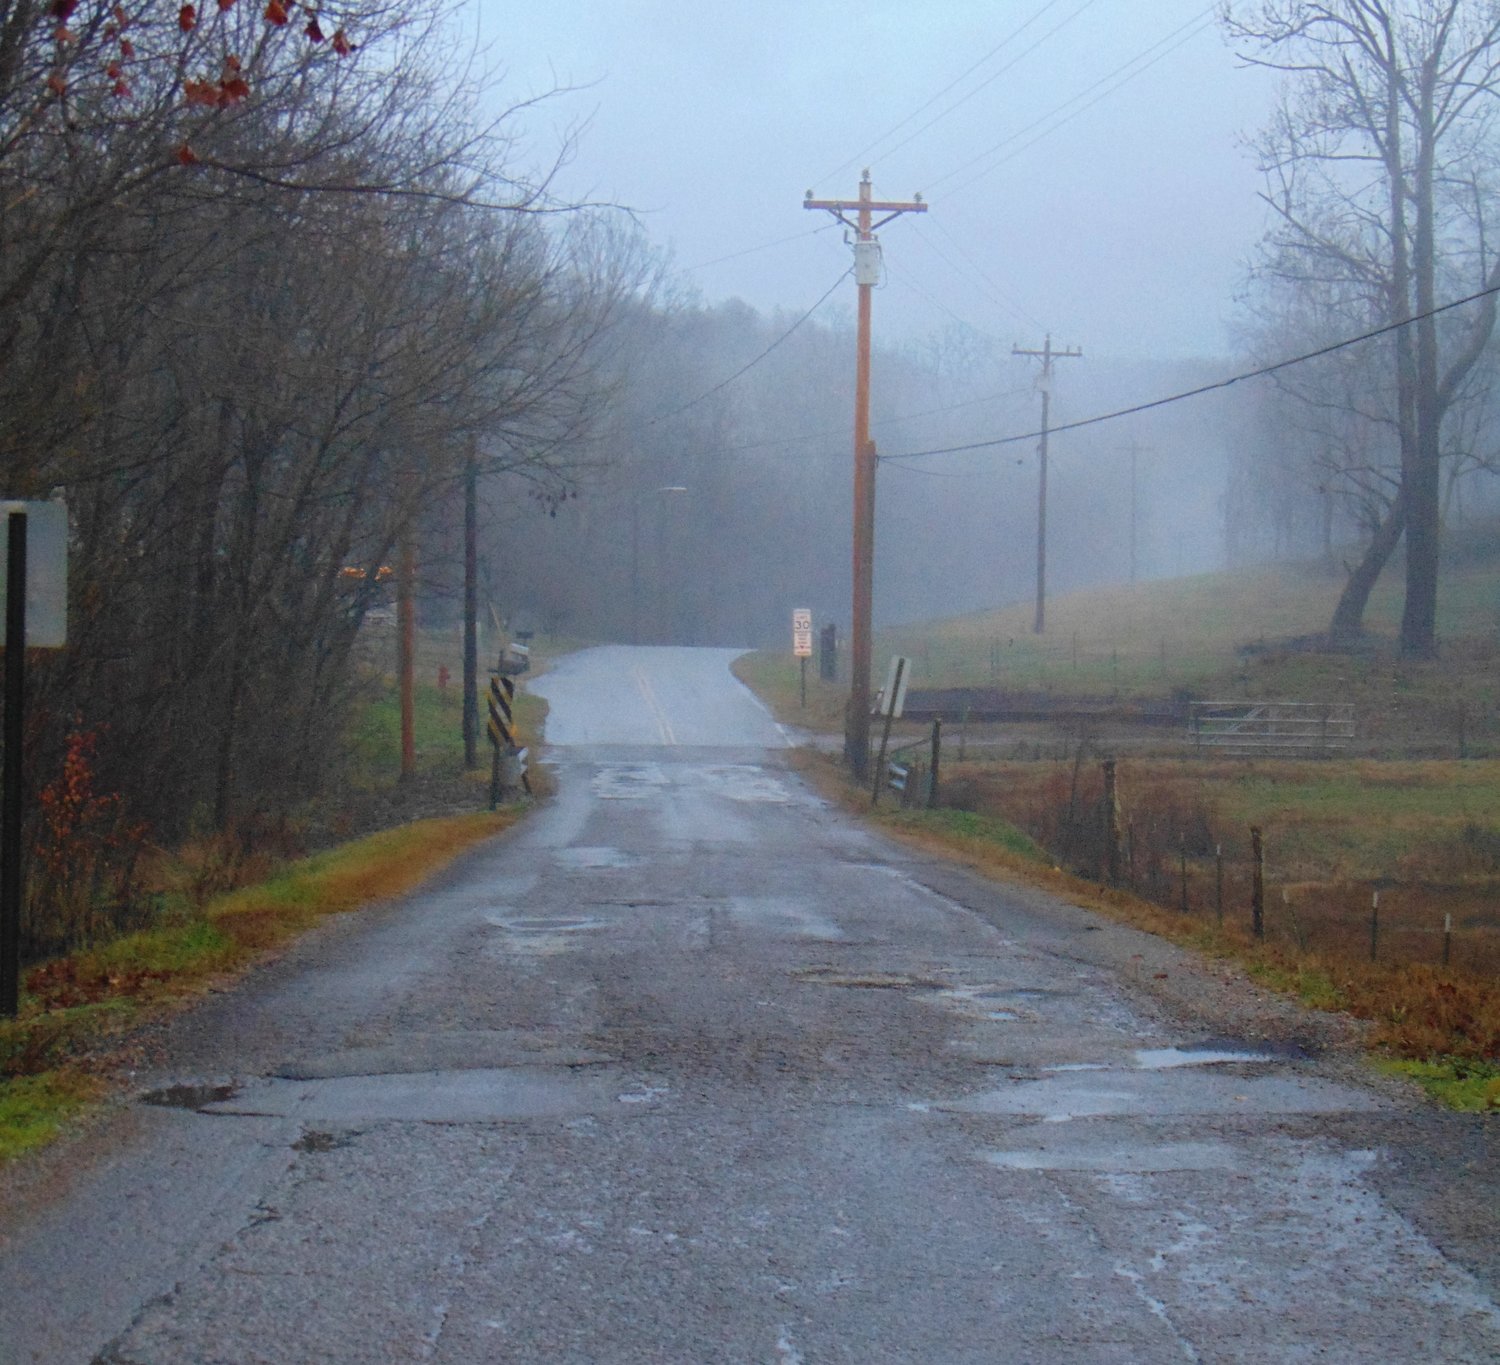 Normandy’s road repaving will be a relief for many traveling down Cascade Hollow
Road, especially on a rainy day.